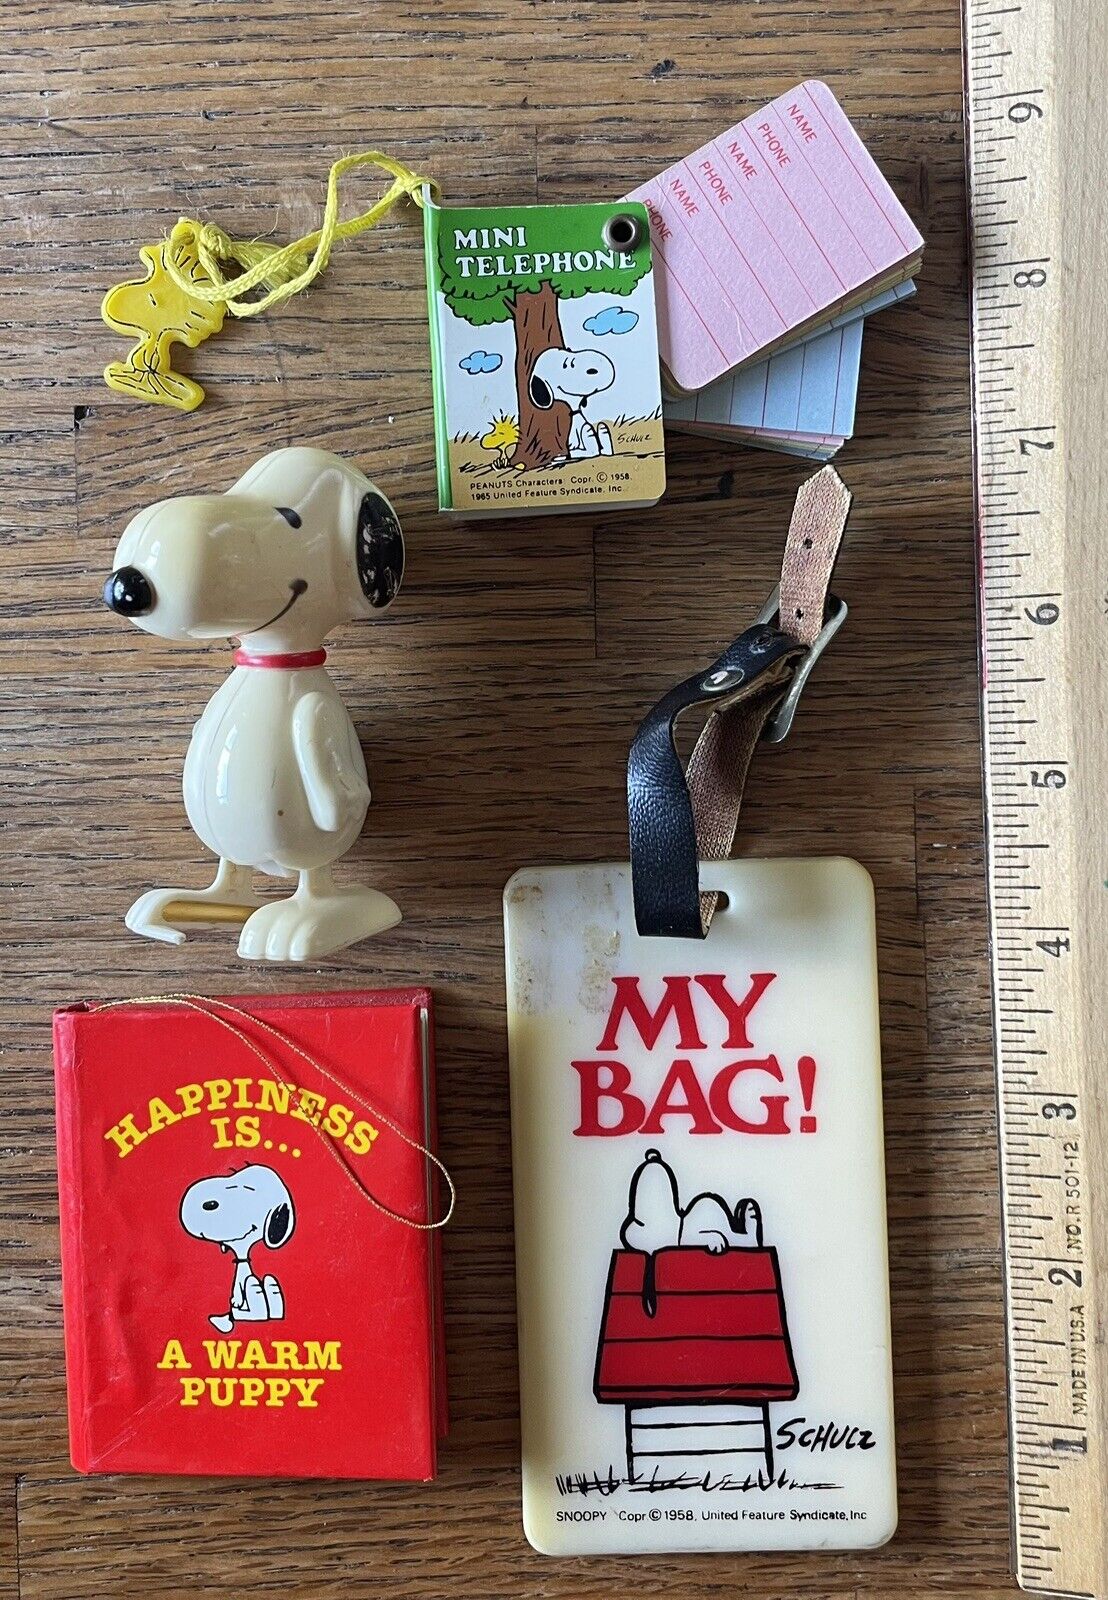 Vintage Snoopy Items From 1970-80’s Peanuts